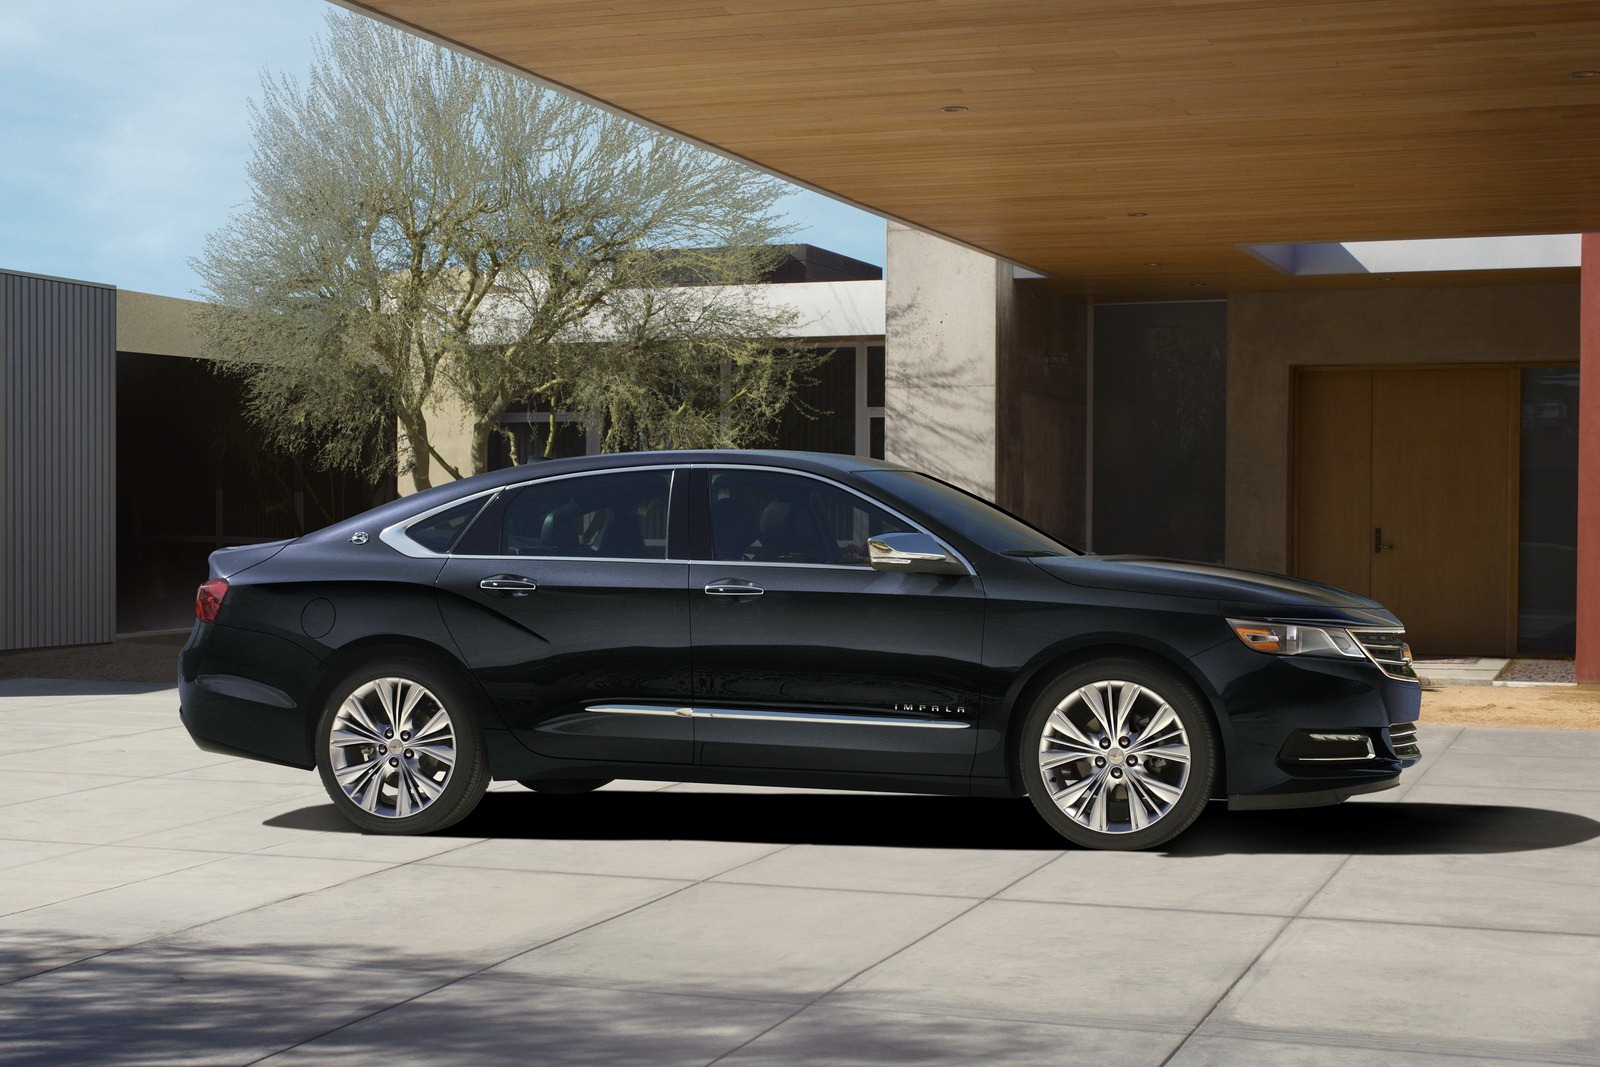 With a base price of $27,535 â€“ it looks like the 2014 Chevrolet Impala will